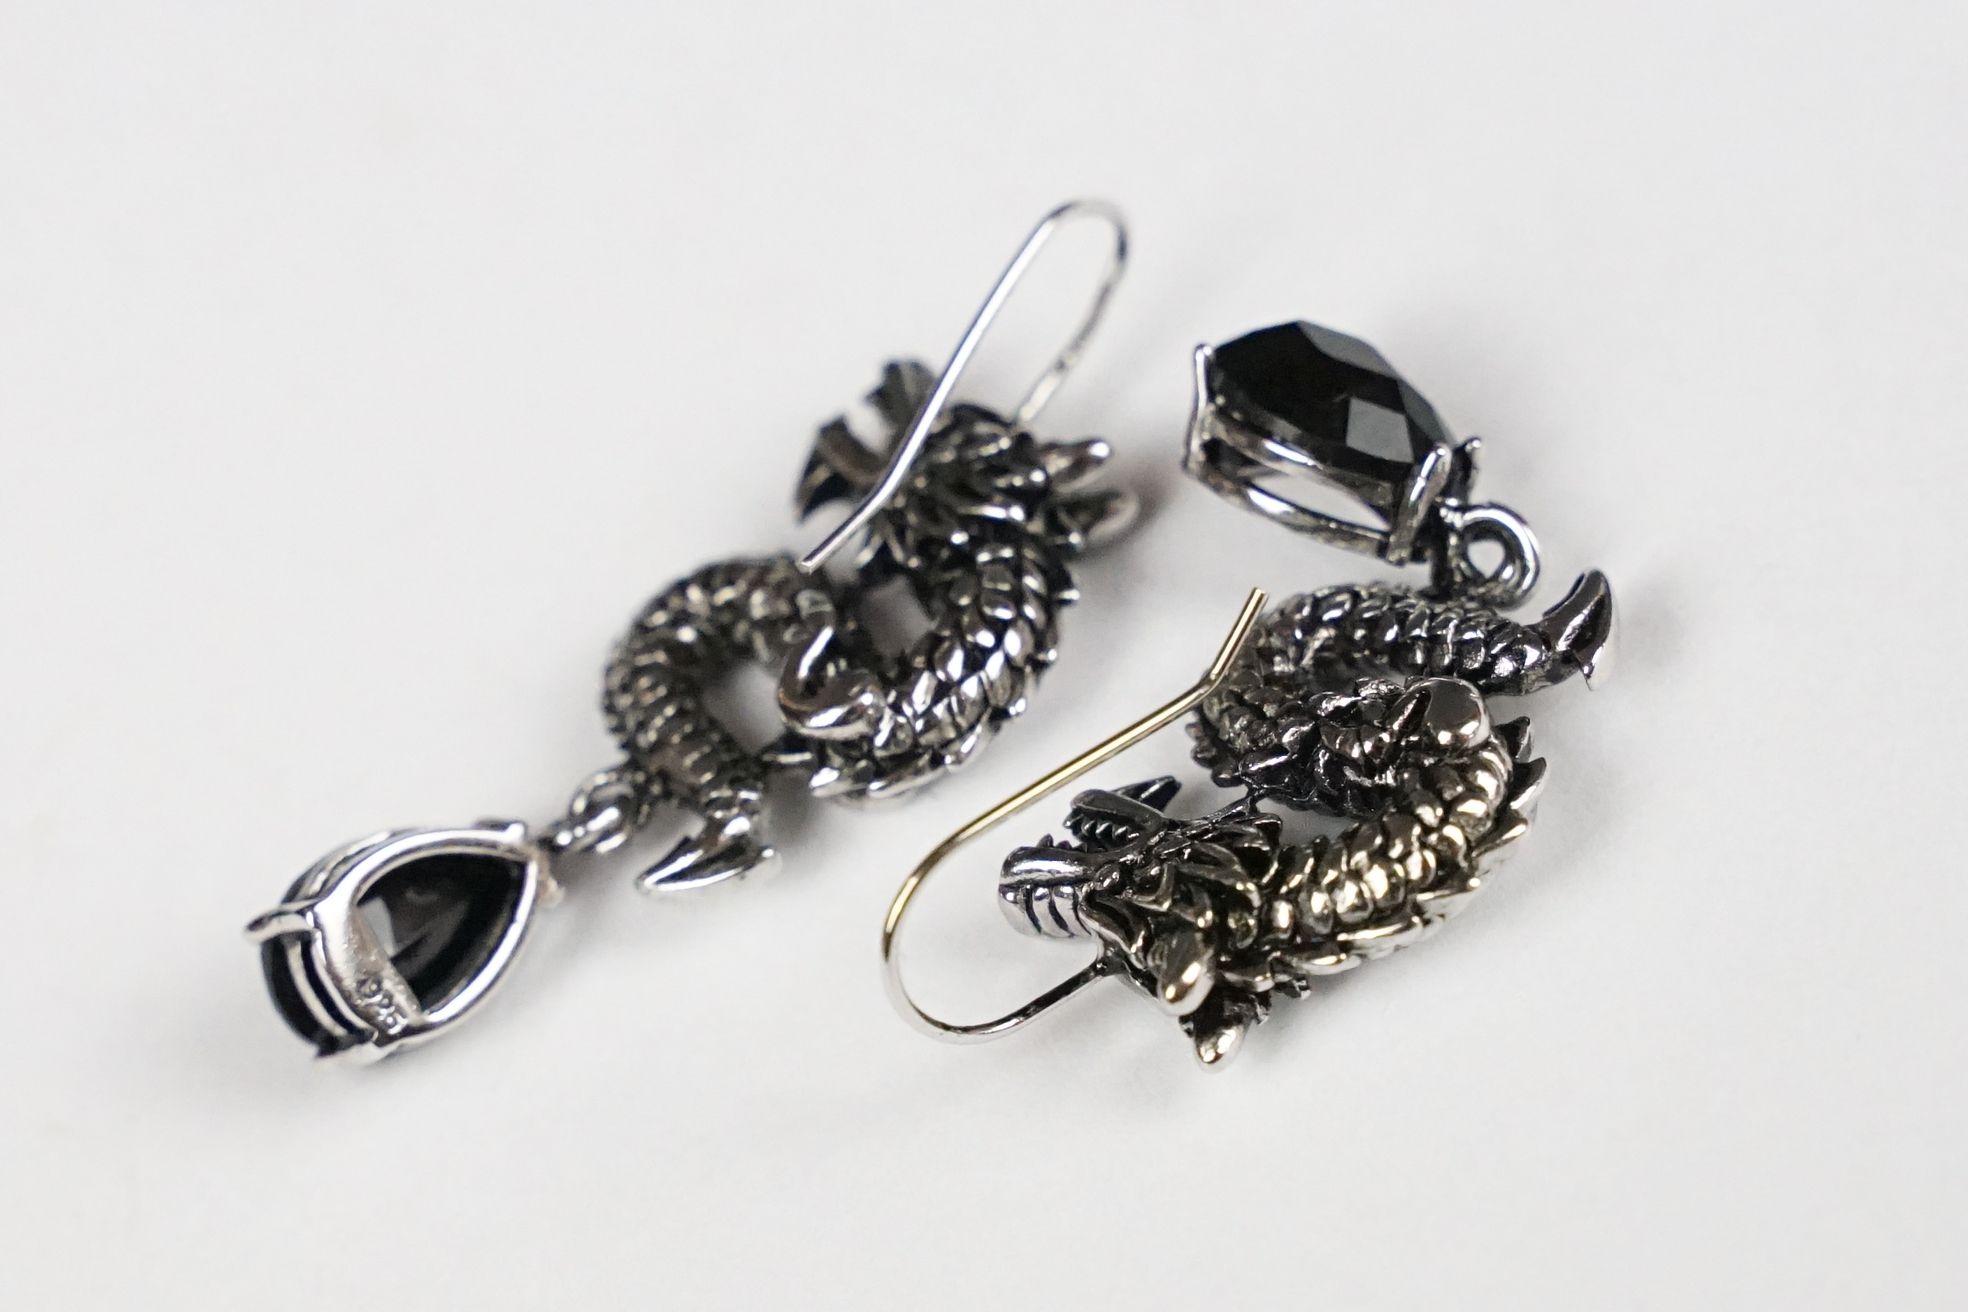 A pair of 925 sterling silver earrings in the form of Chinese dragons with faceted stone drops, - Image 4 of 4